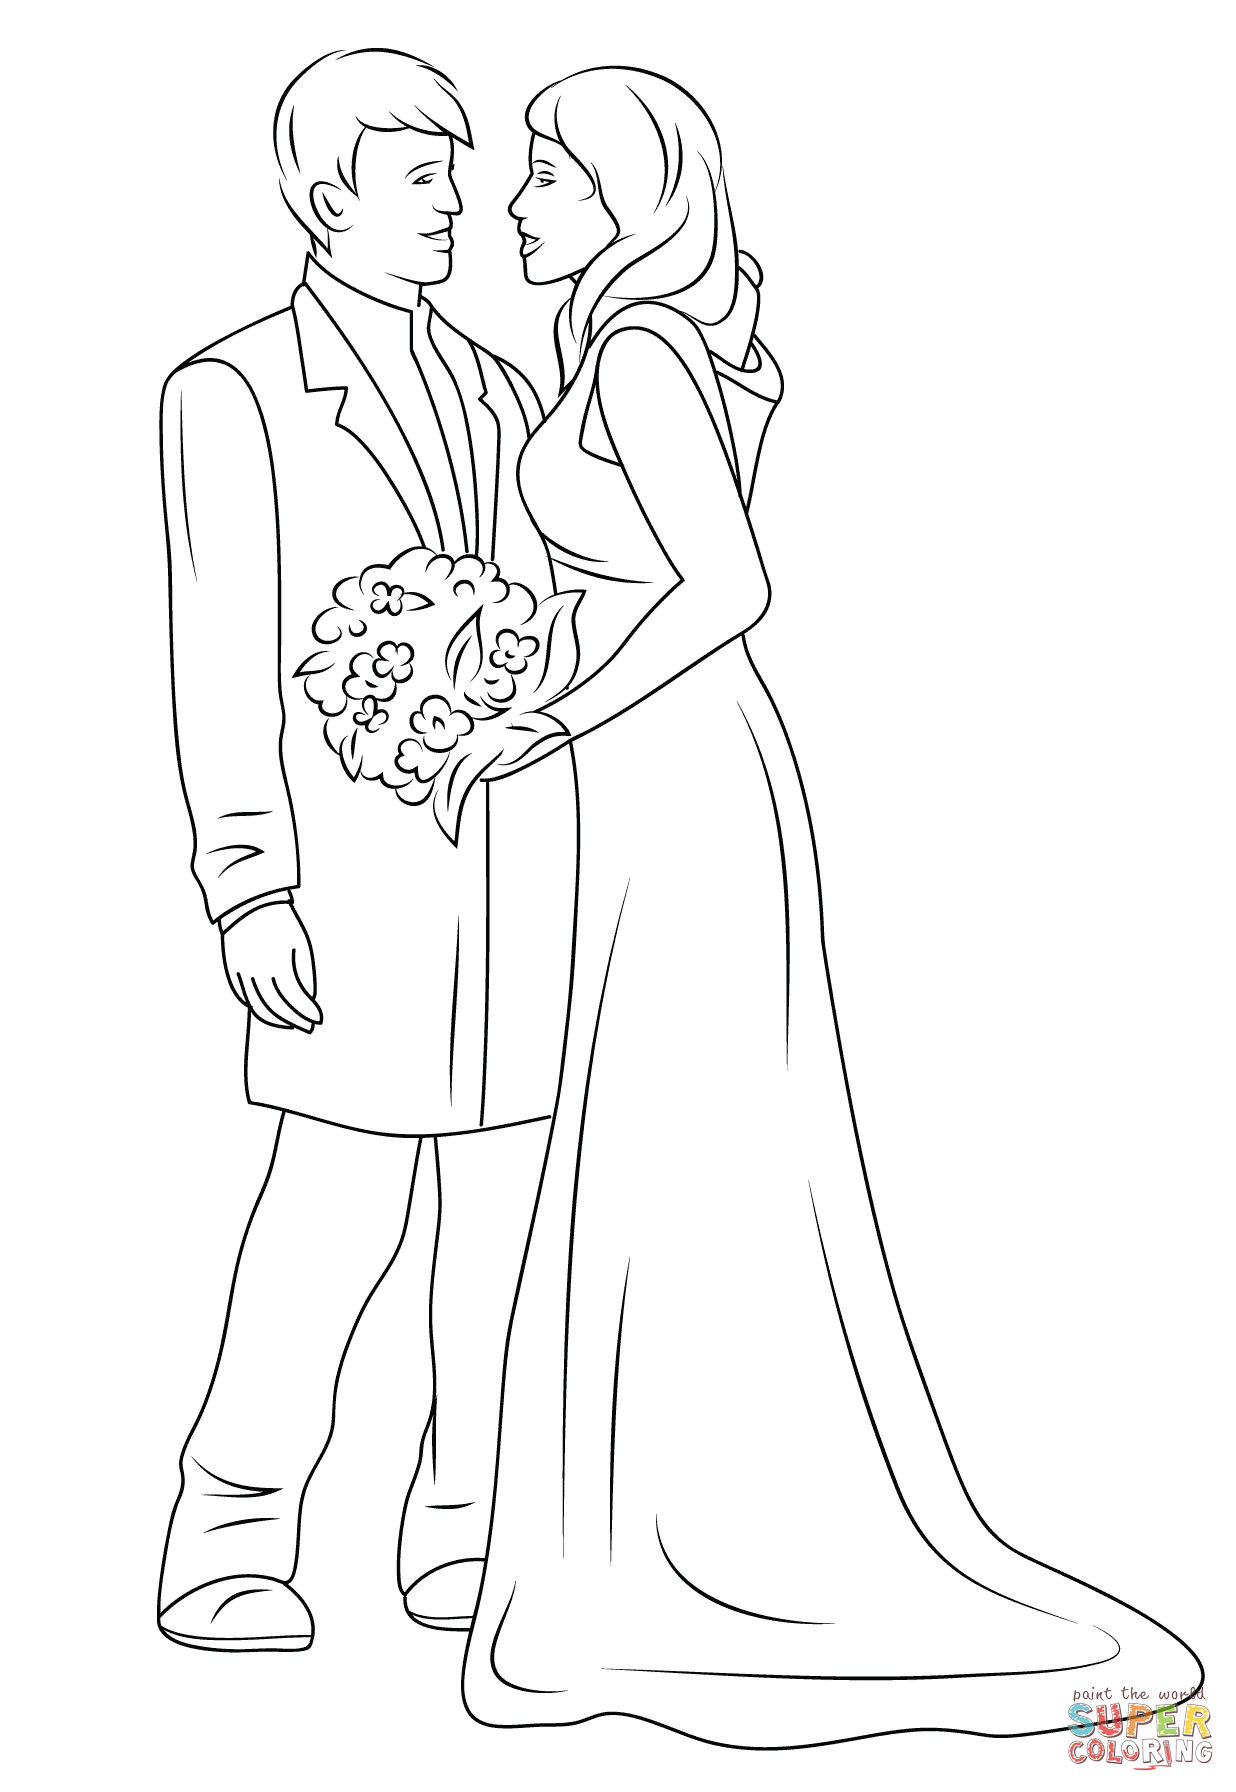 Wedding Couple coloring page | Free Printable Coloring Pages